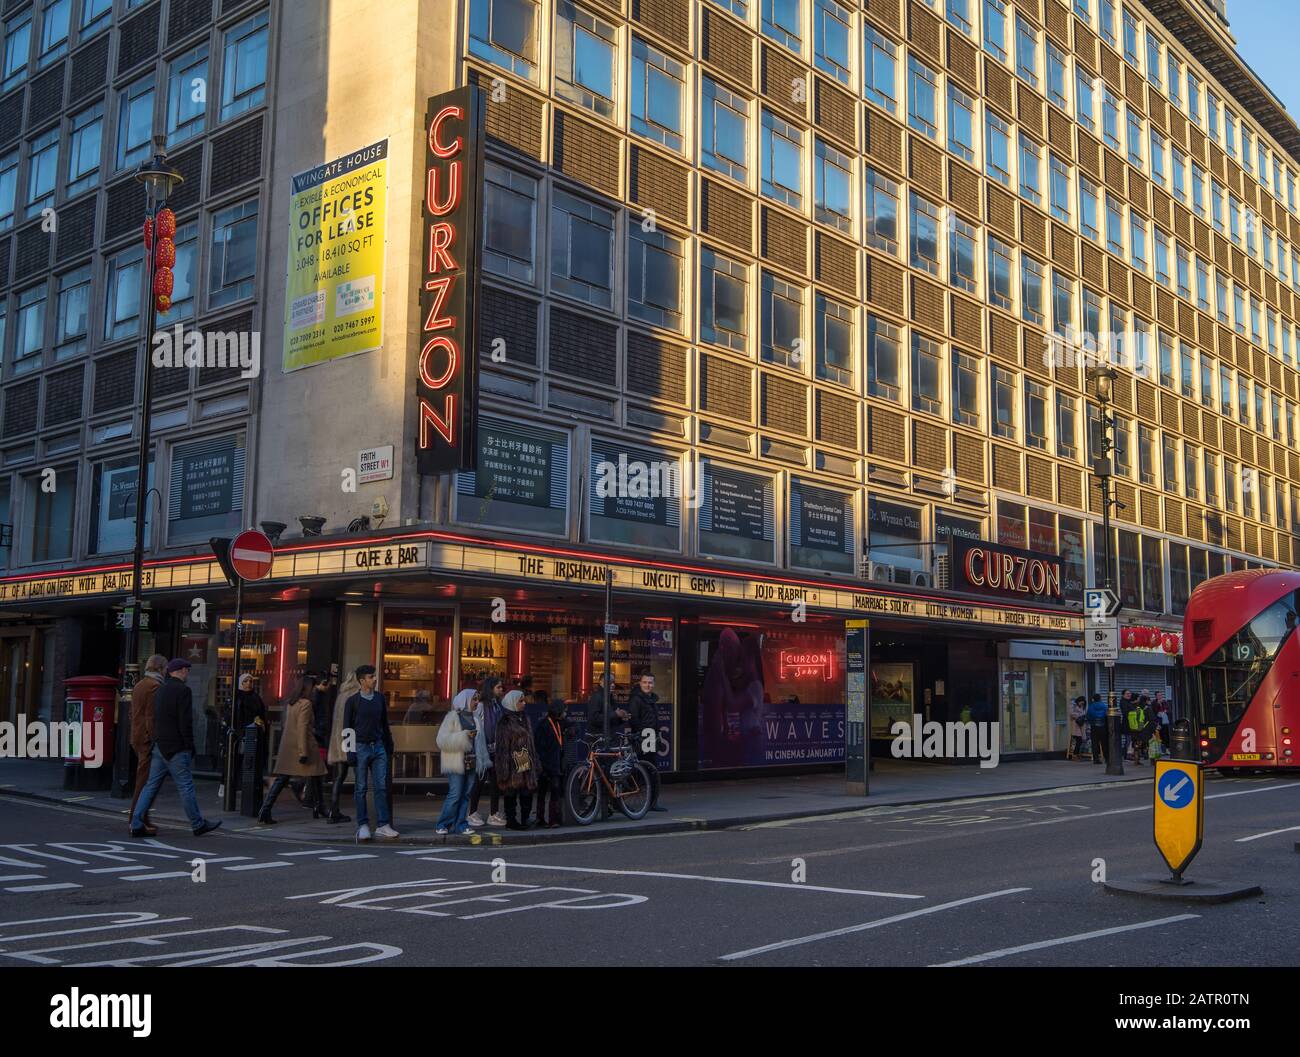 Curzon cinema on Shaftesbury Avenue in London in the afternoon sunlight. Stock Photo